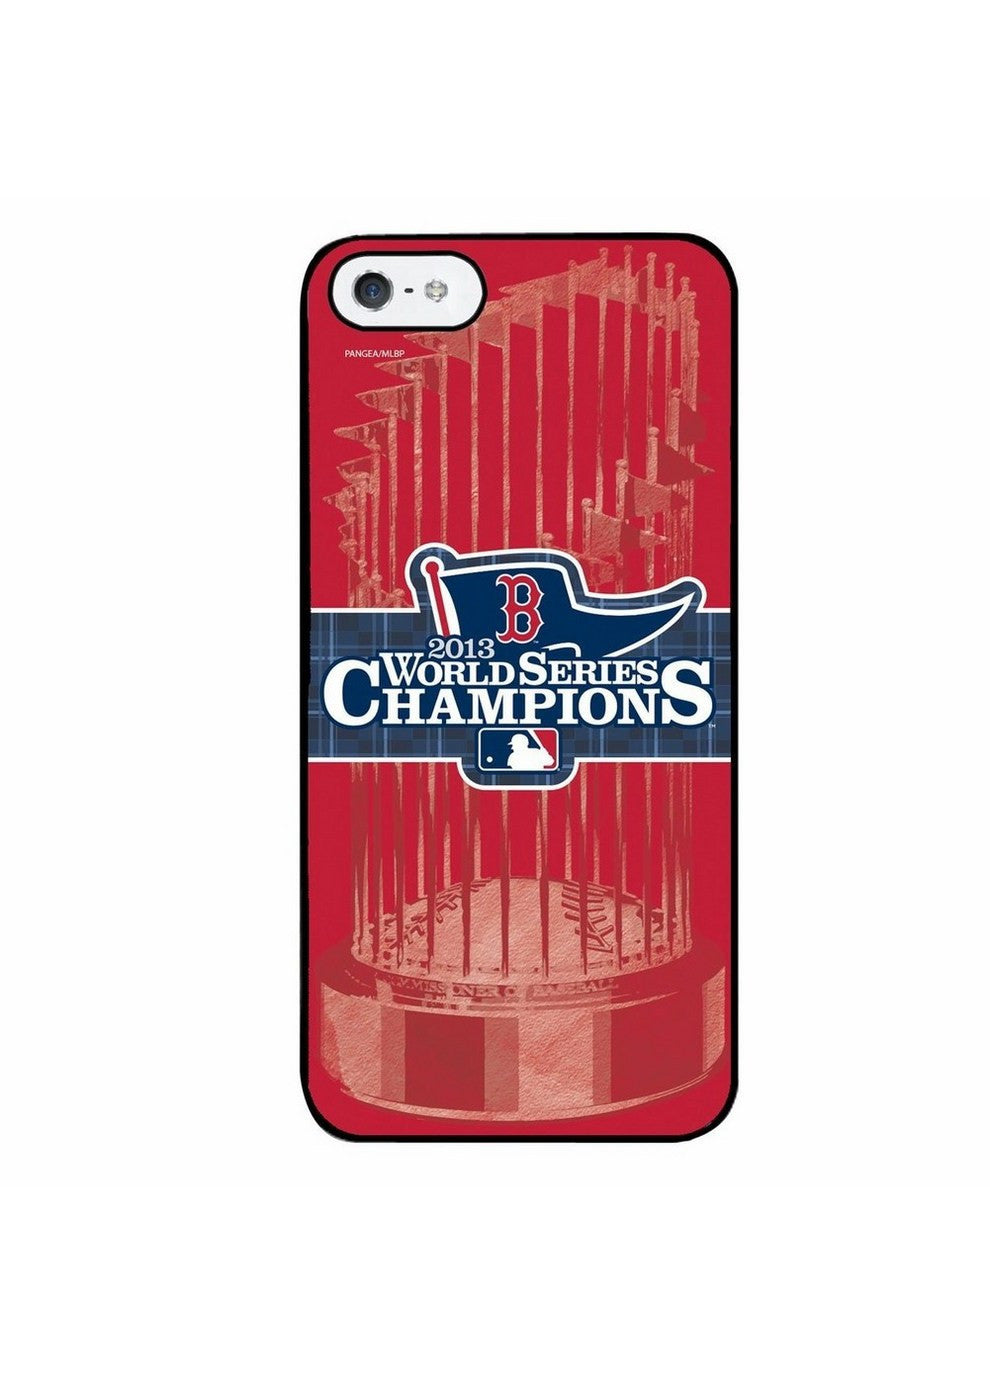 Mlb World Series Champs 2013 Trophy Iphone 5/5s/5c Case - Boston Red Sox